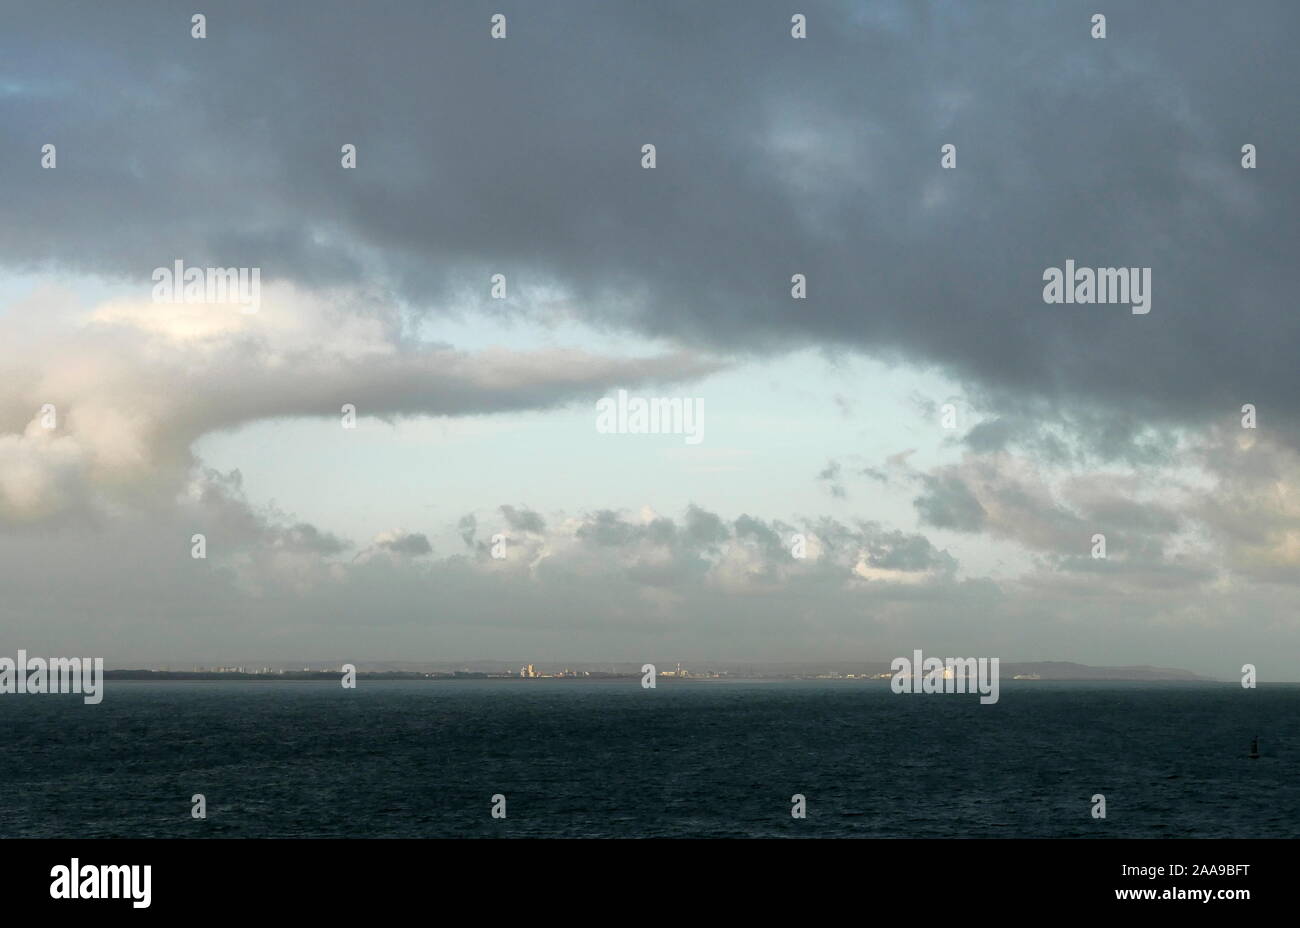 AJAXNETPHOTO. SEPTEMBER, 2019. CALAIS, FRANCE. - EARLY MORNING CLOUDSCAPE OVER THE NORTHERN FRENCH COAST AND PORT OF CALAIS. PHOTO:JONATHAN EASTLAND REF:GX8 192609 20525 Stock Photo